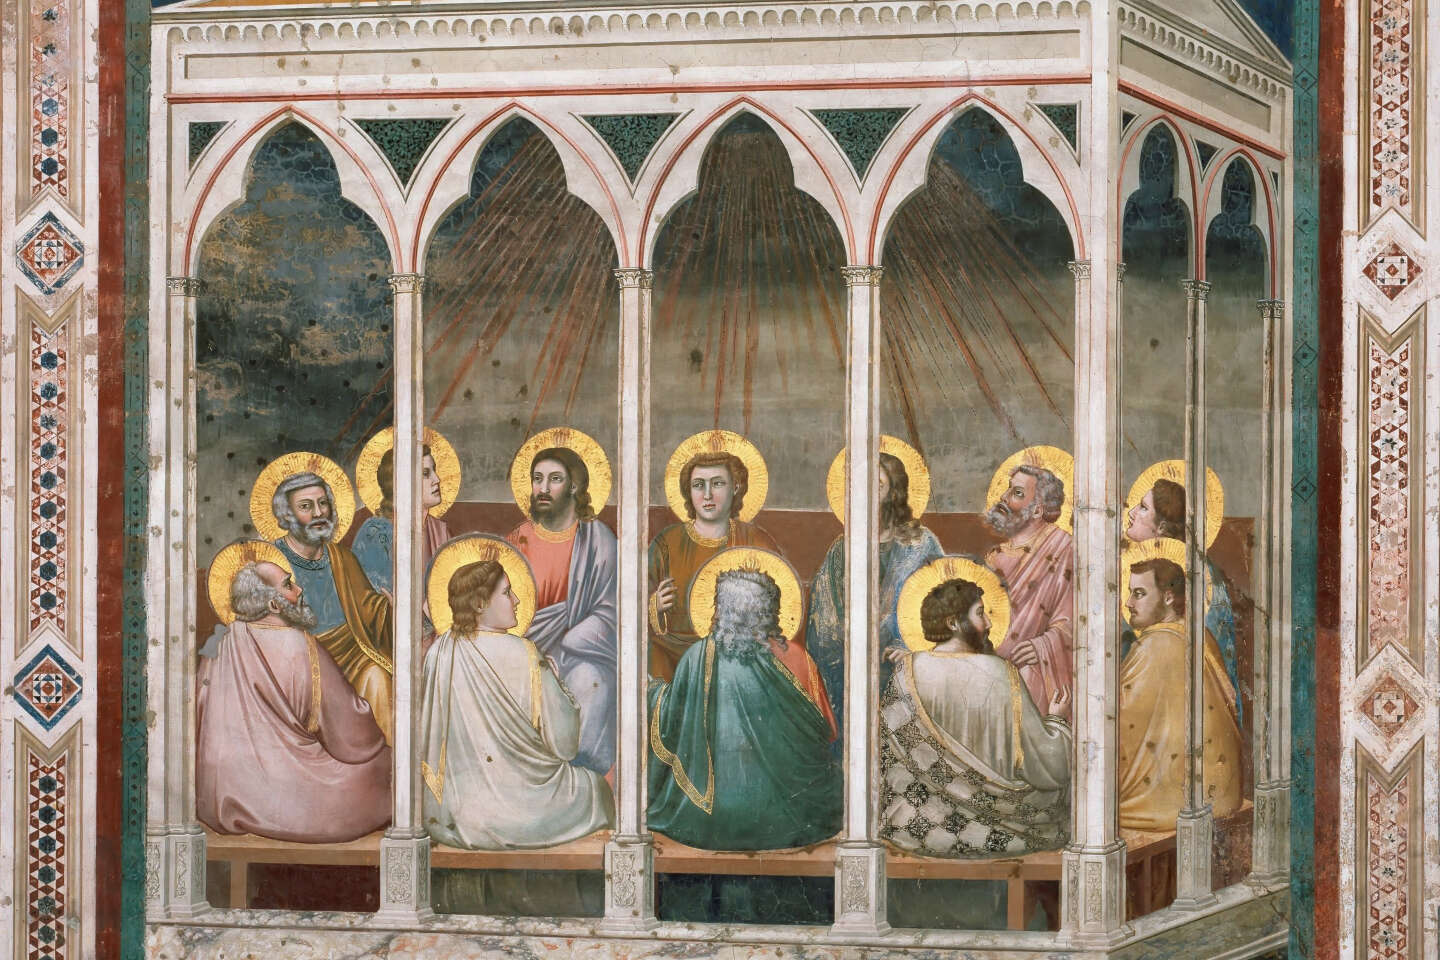 Pentecost: What we know about the very first Christians